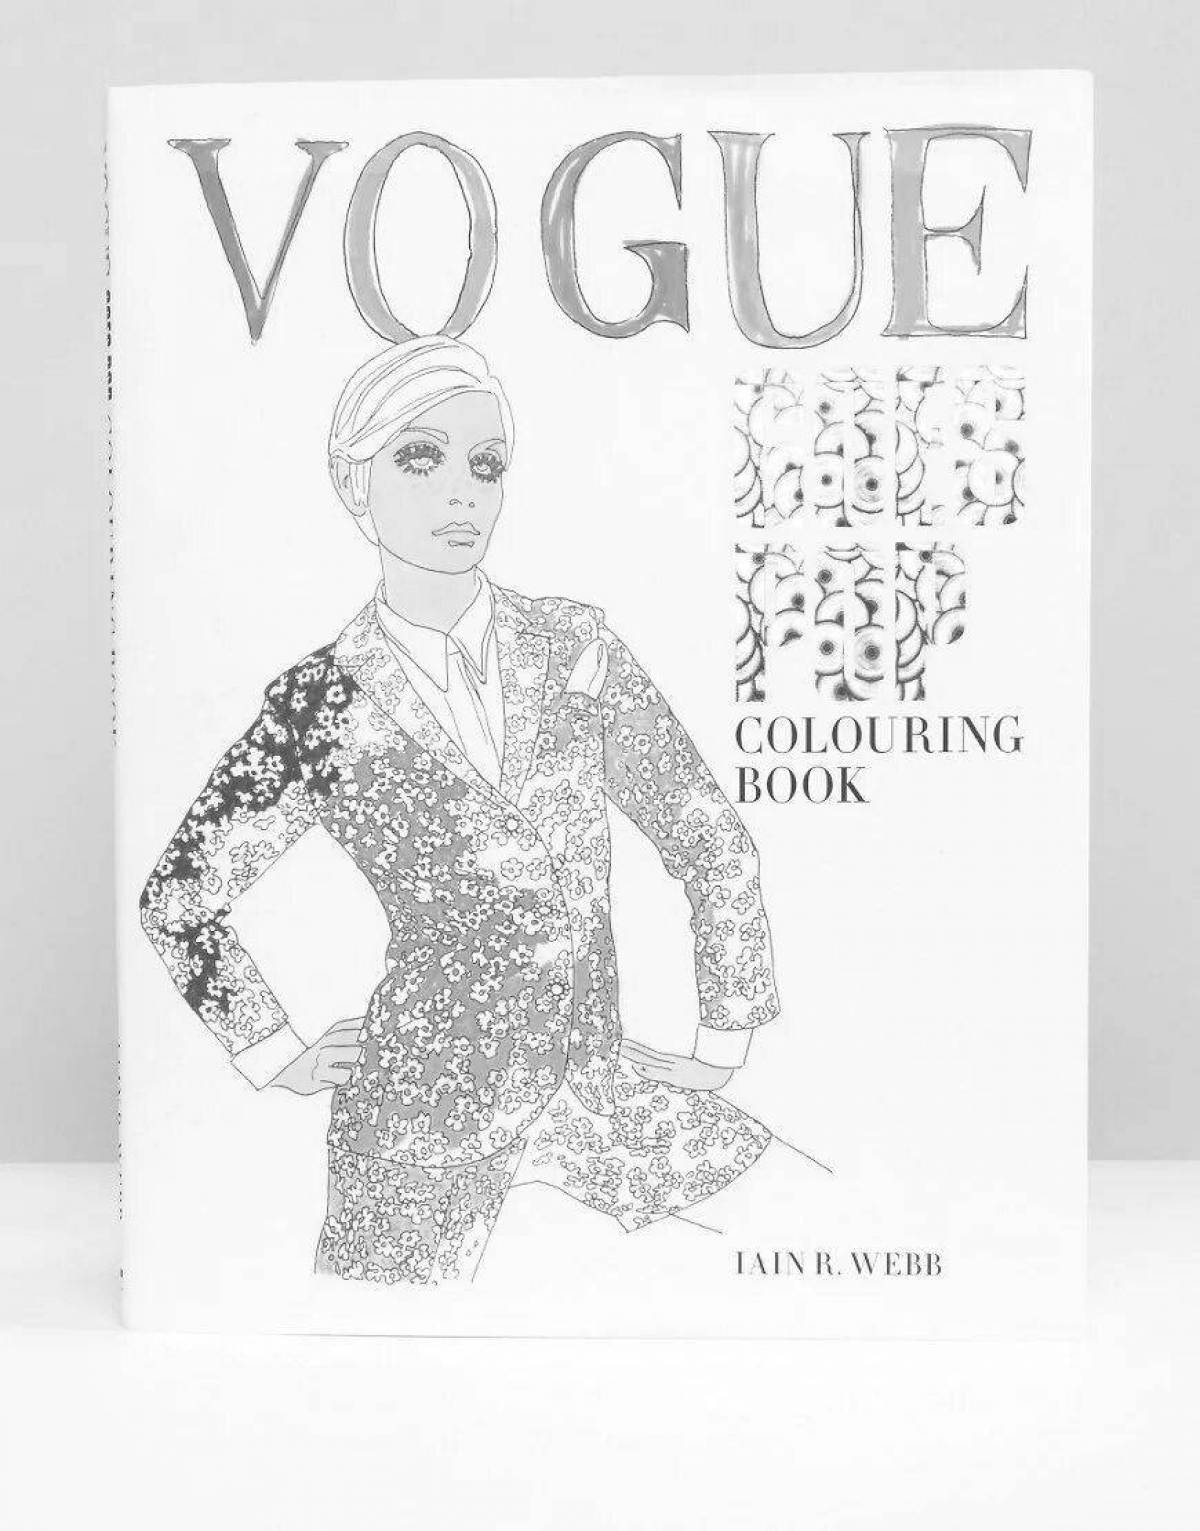 Vogue style coloring